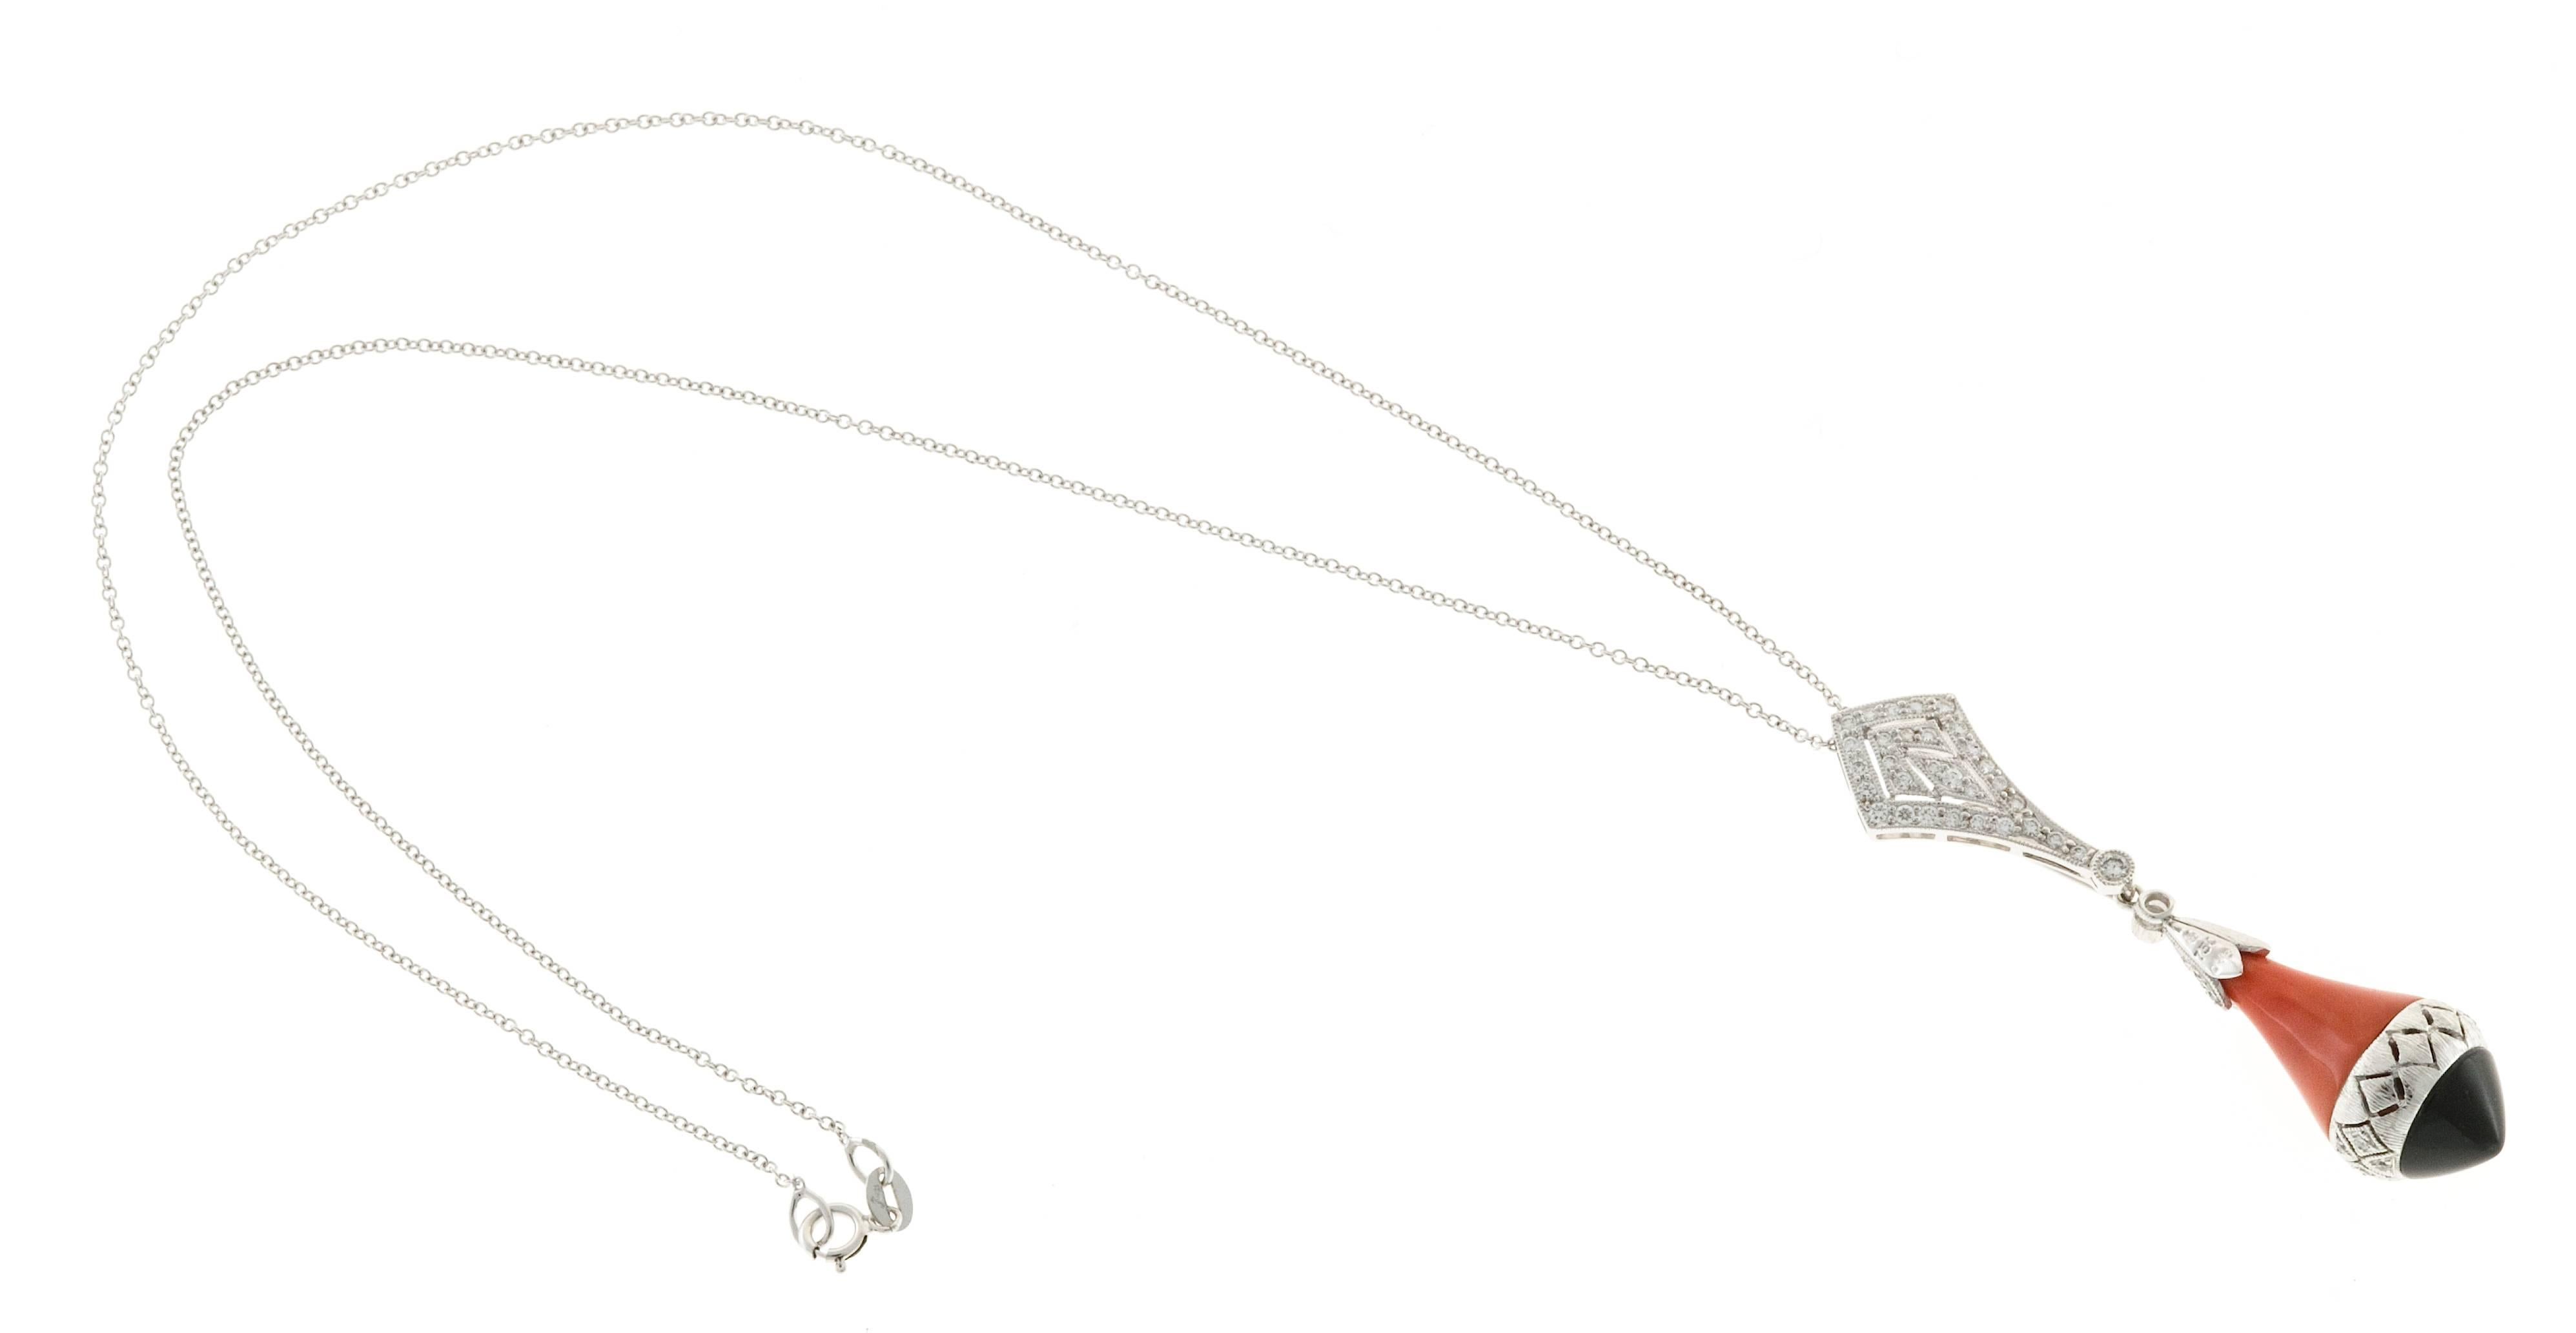 18k white gold pendant necklace. This necklace is made in two sections. The top is hand bead set with 31 full cut diamonds. The chain passes invisibly through the top of the pendant. The section can be worn by itself. It also has a hidden pendant